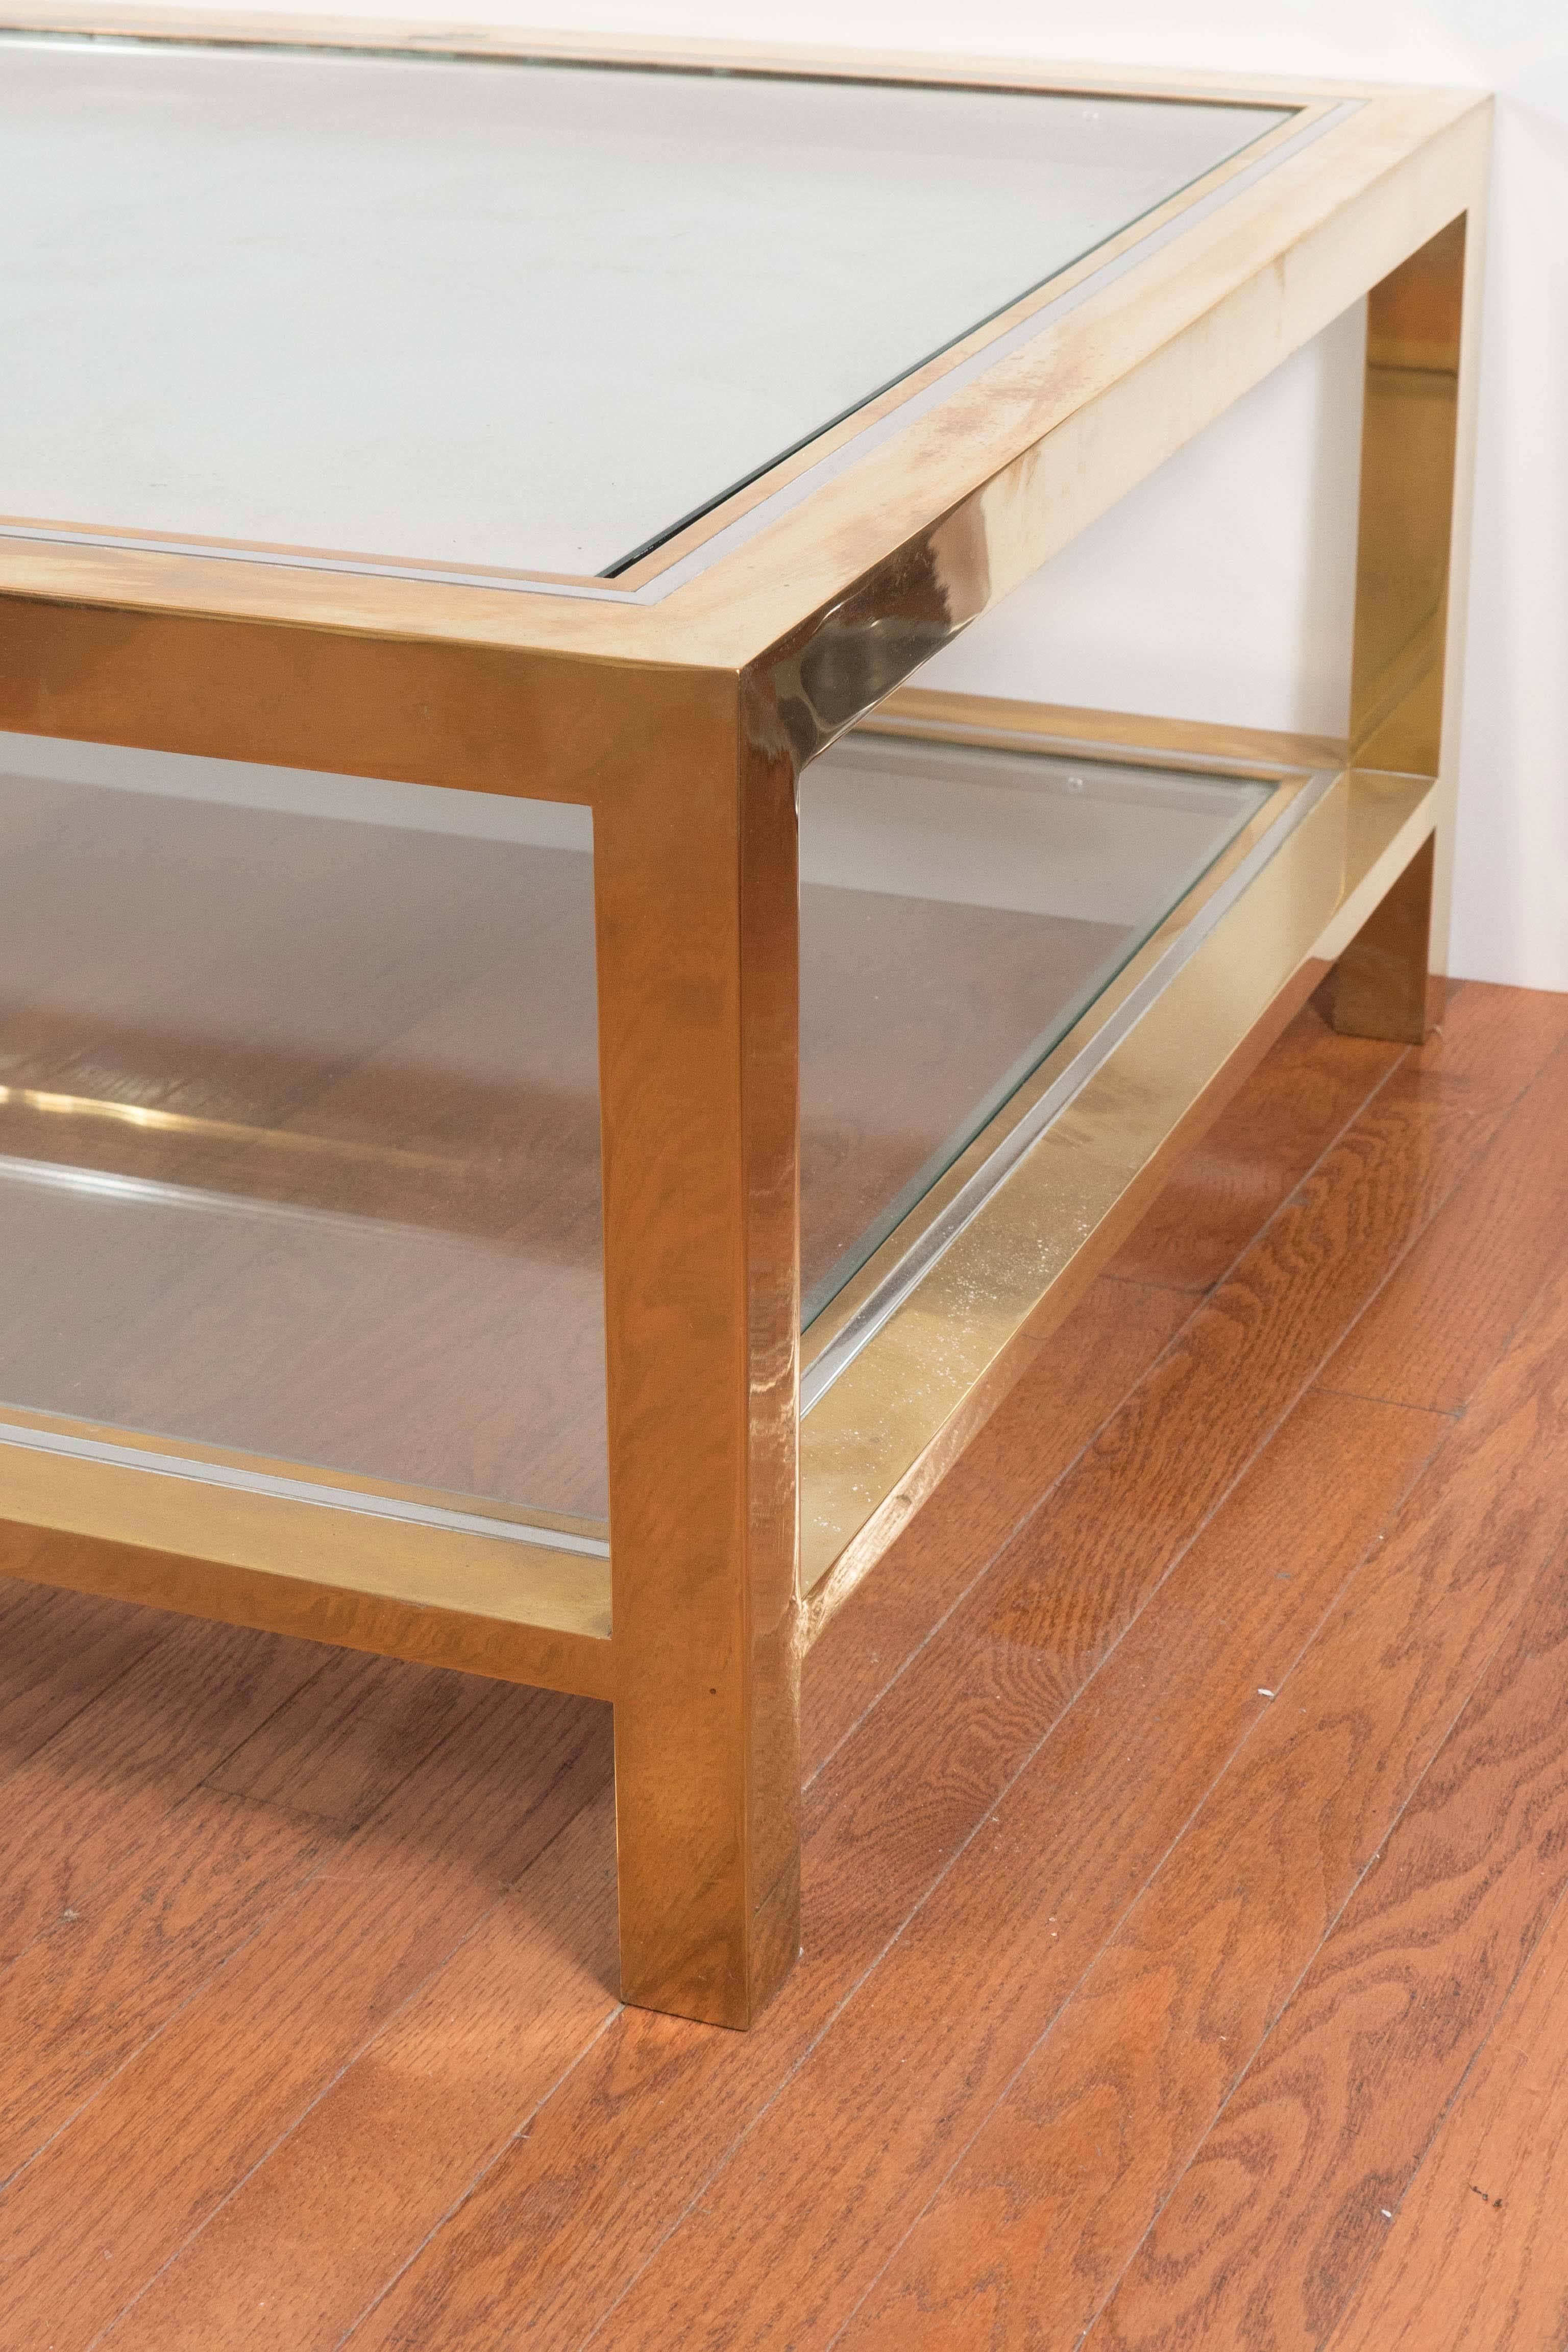 Two-tier brass coffee table with nickel trim and glass tops by Willy Rizzo.